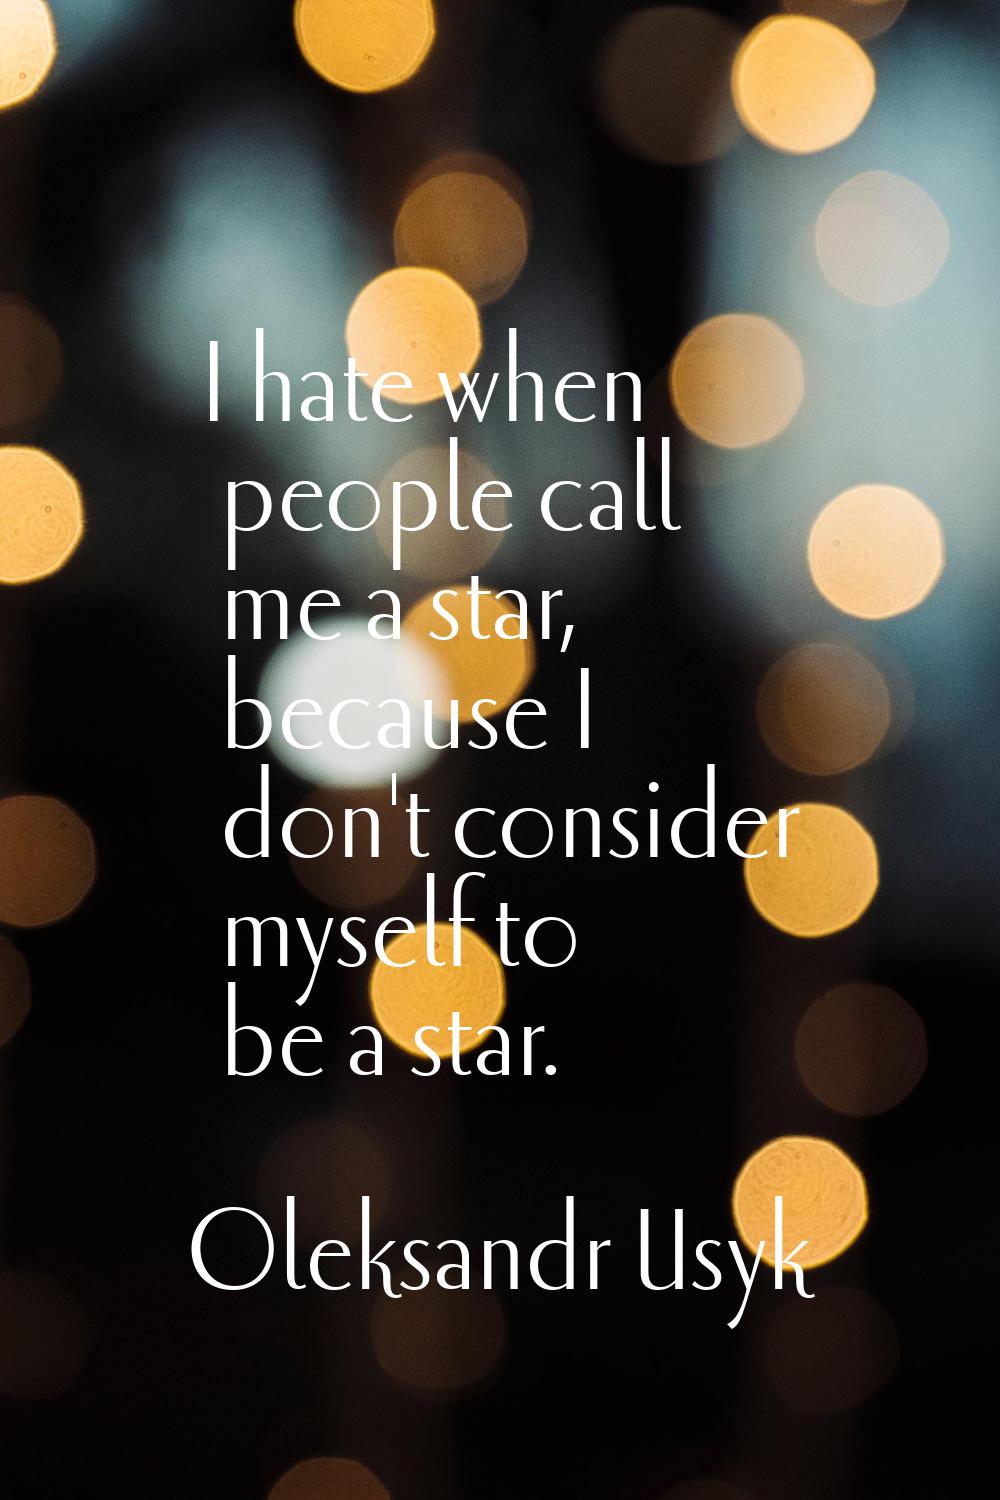 I hate when people call me a star, because I don't consider myself to be a star.